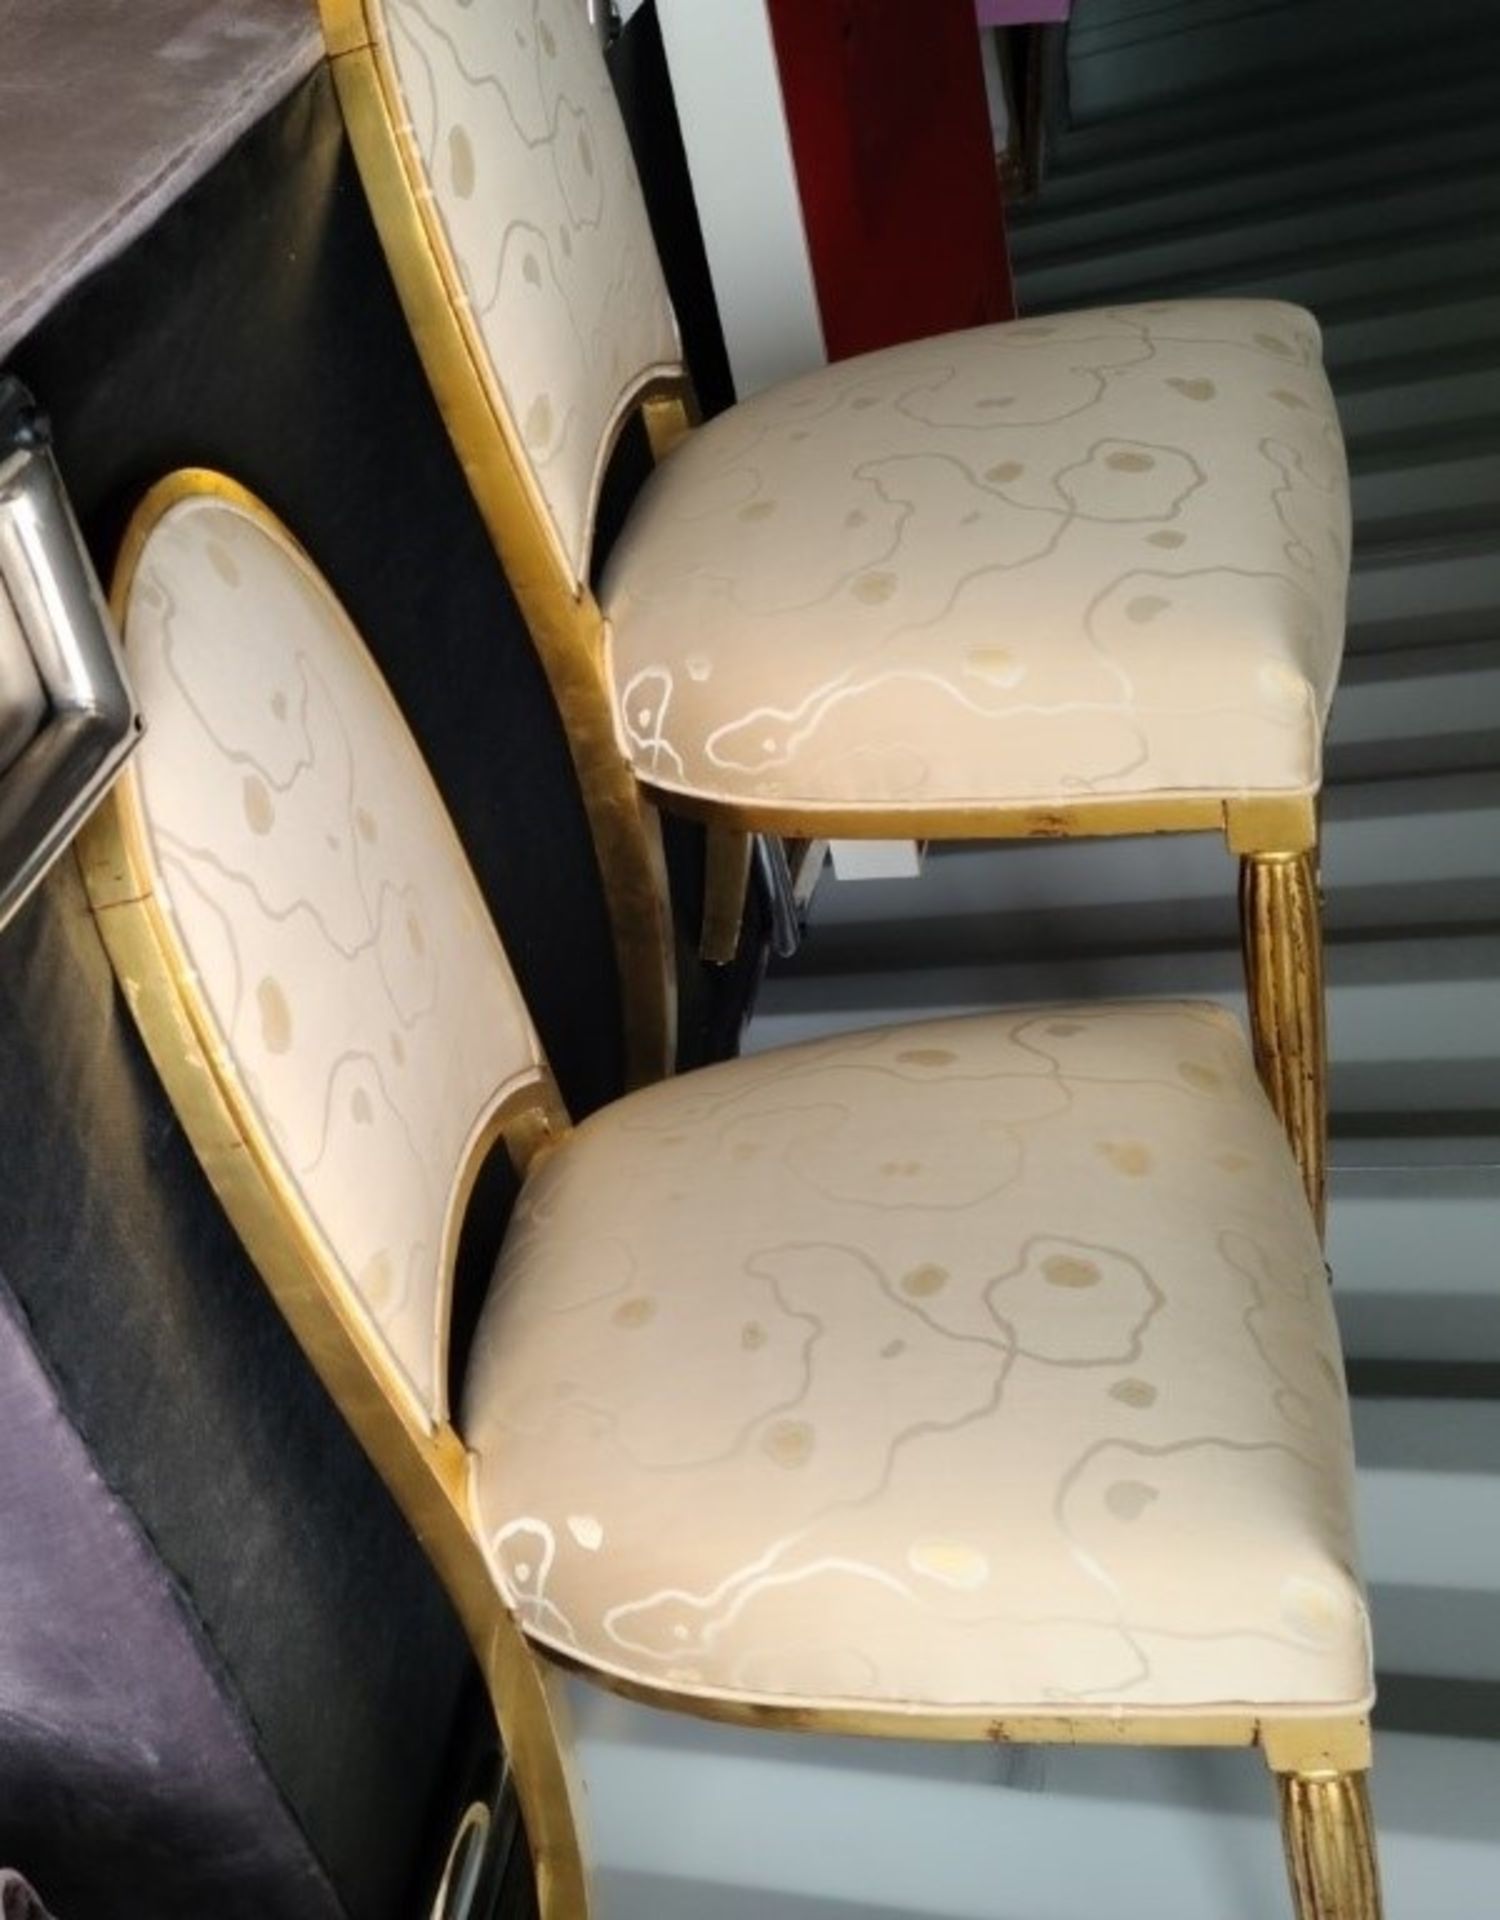 Set Of 2 x Gold Embellished 'Casa Padrino' Luxury Dining Chairs In Cream Art Deco Style